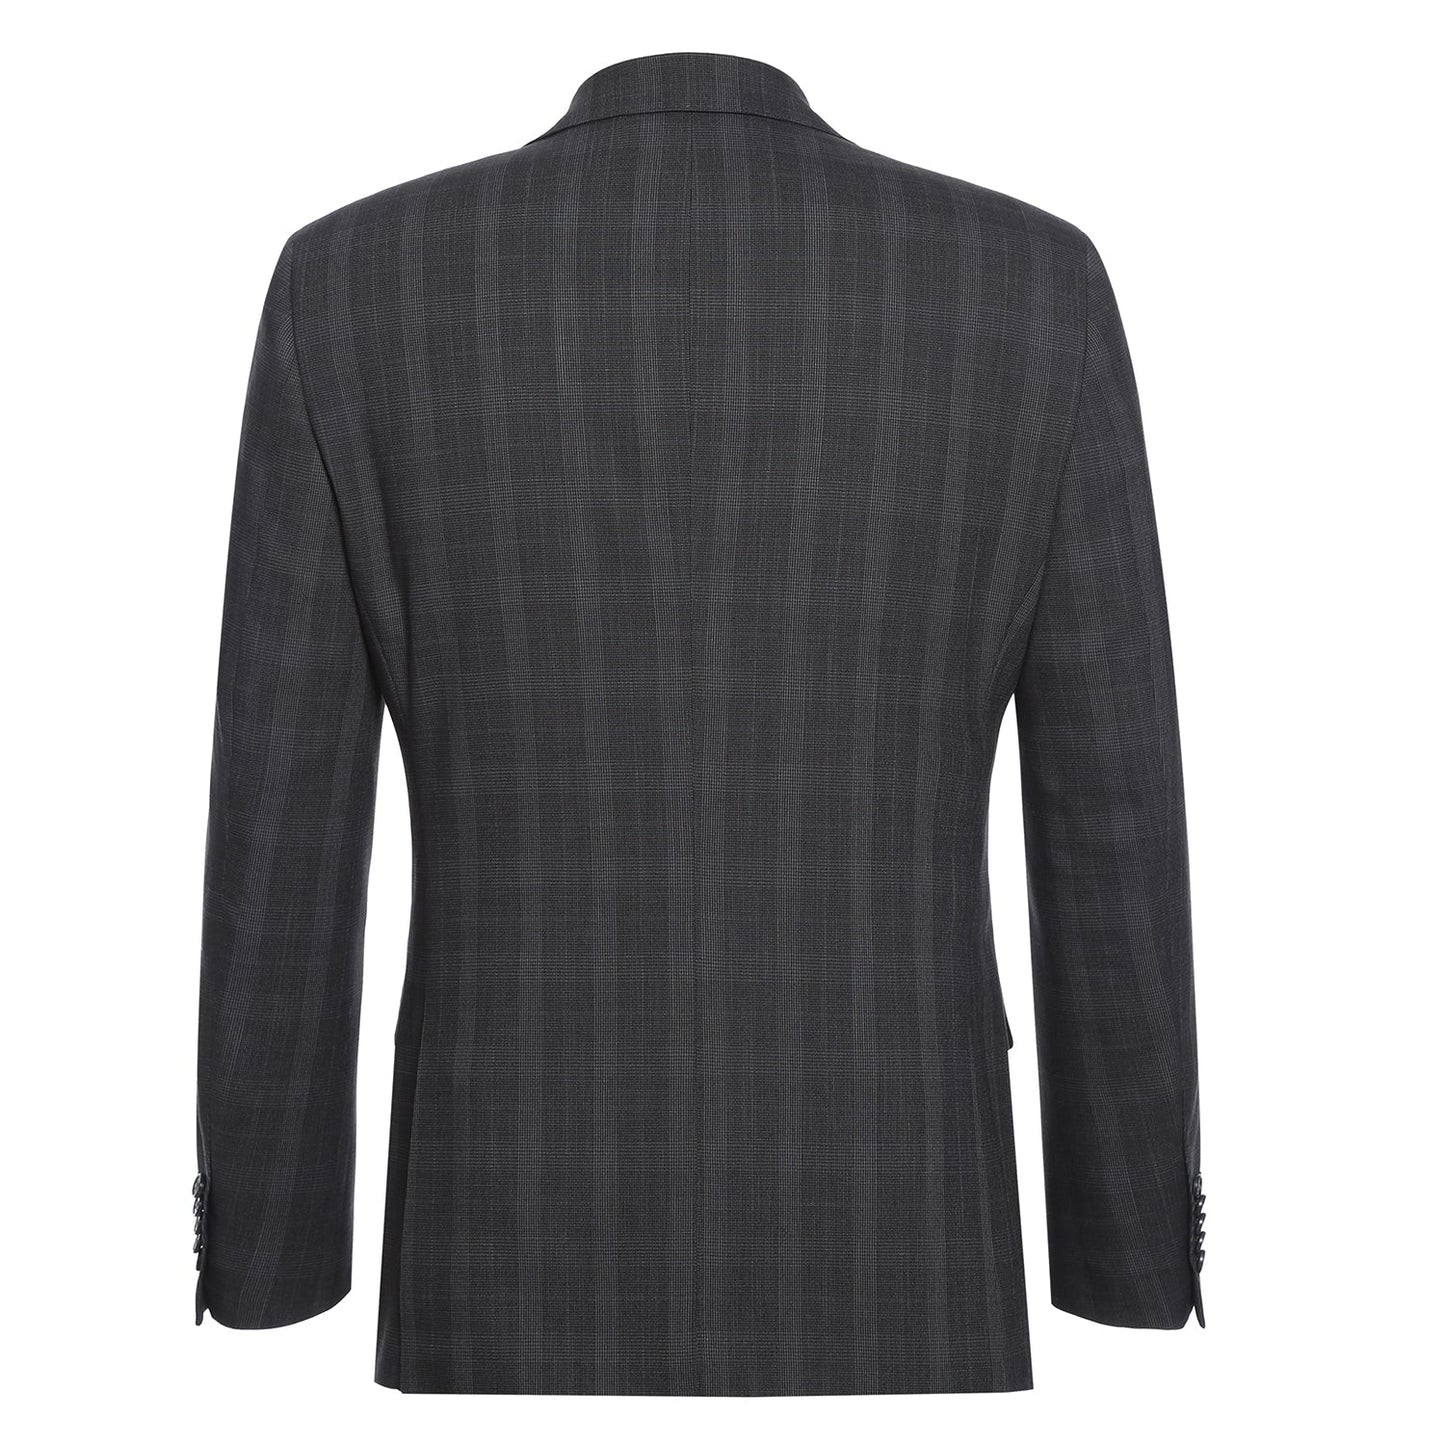 72-52-095EL English Laundry Slim Fit Charcoal Checked Notch Suit